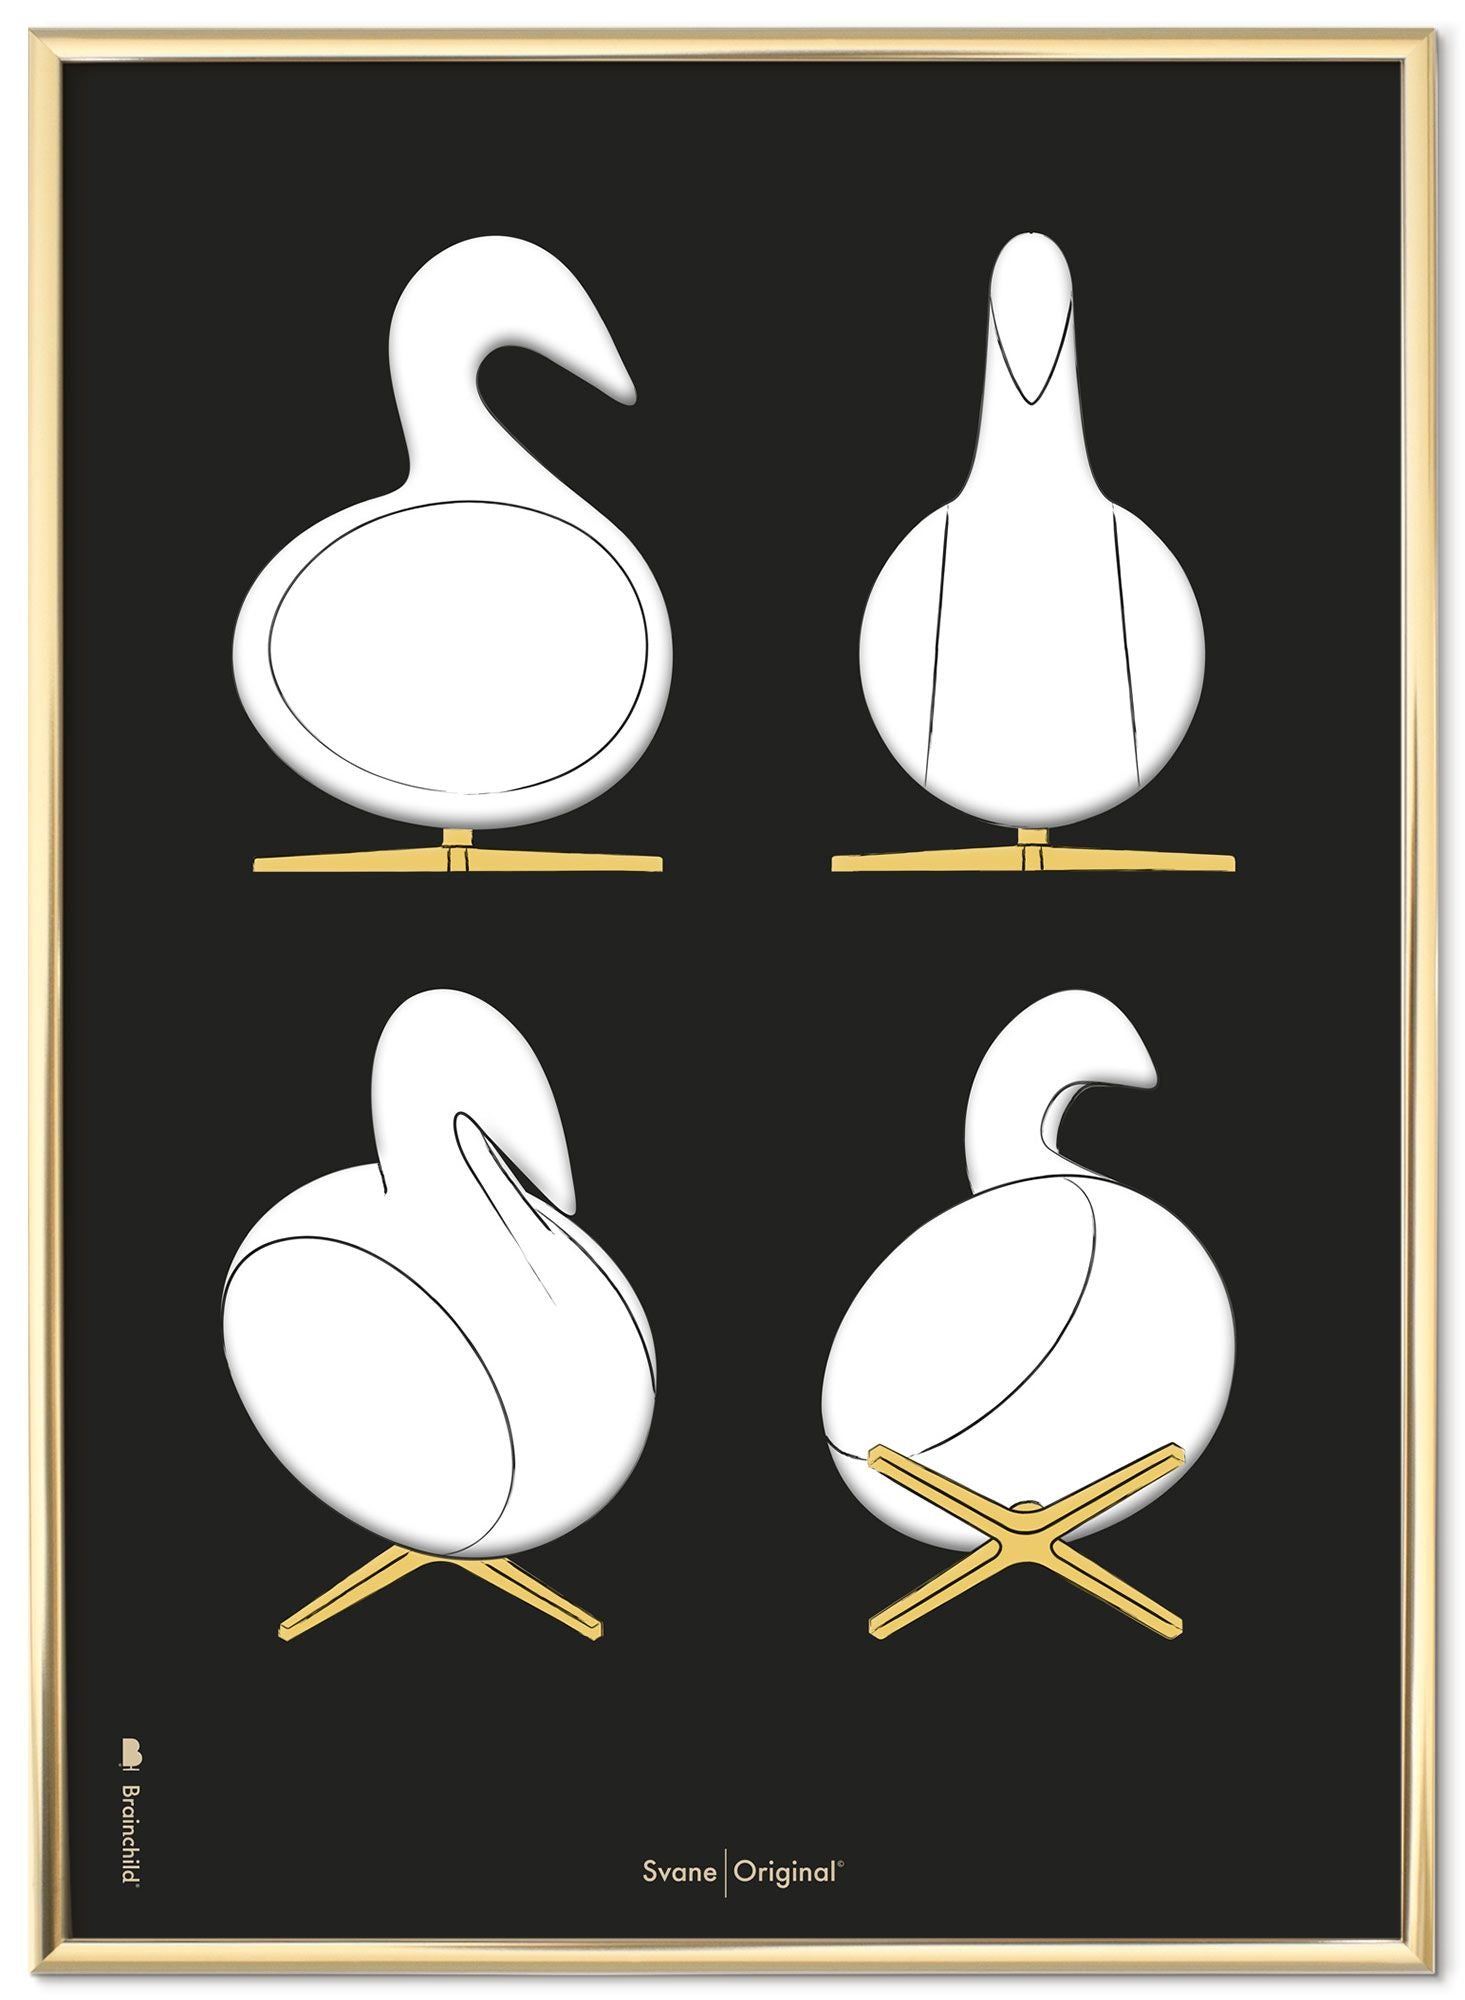 Brainchild Swan Design Sketches Poster Frame Made Of Brass Colored Metal 30x40 Cm, Black Background